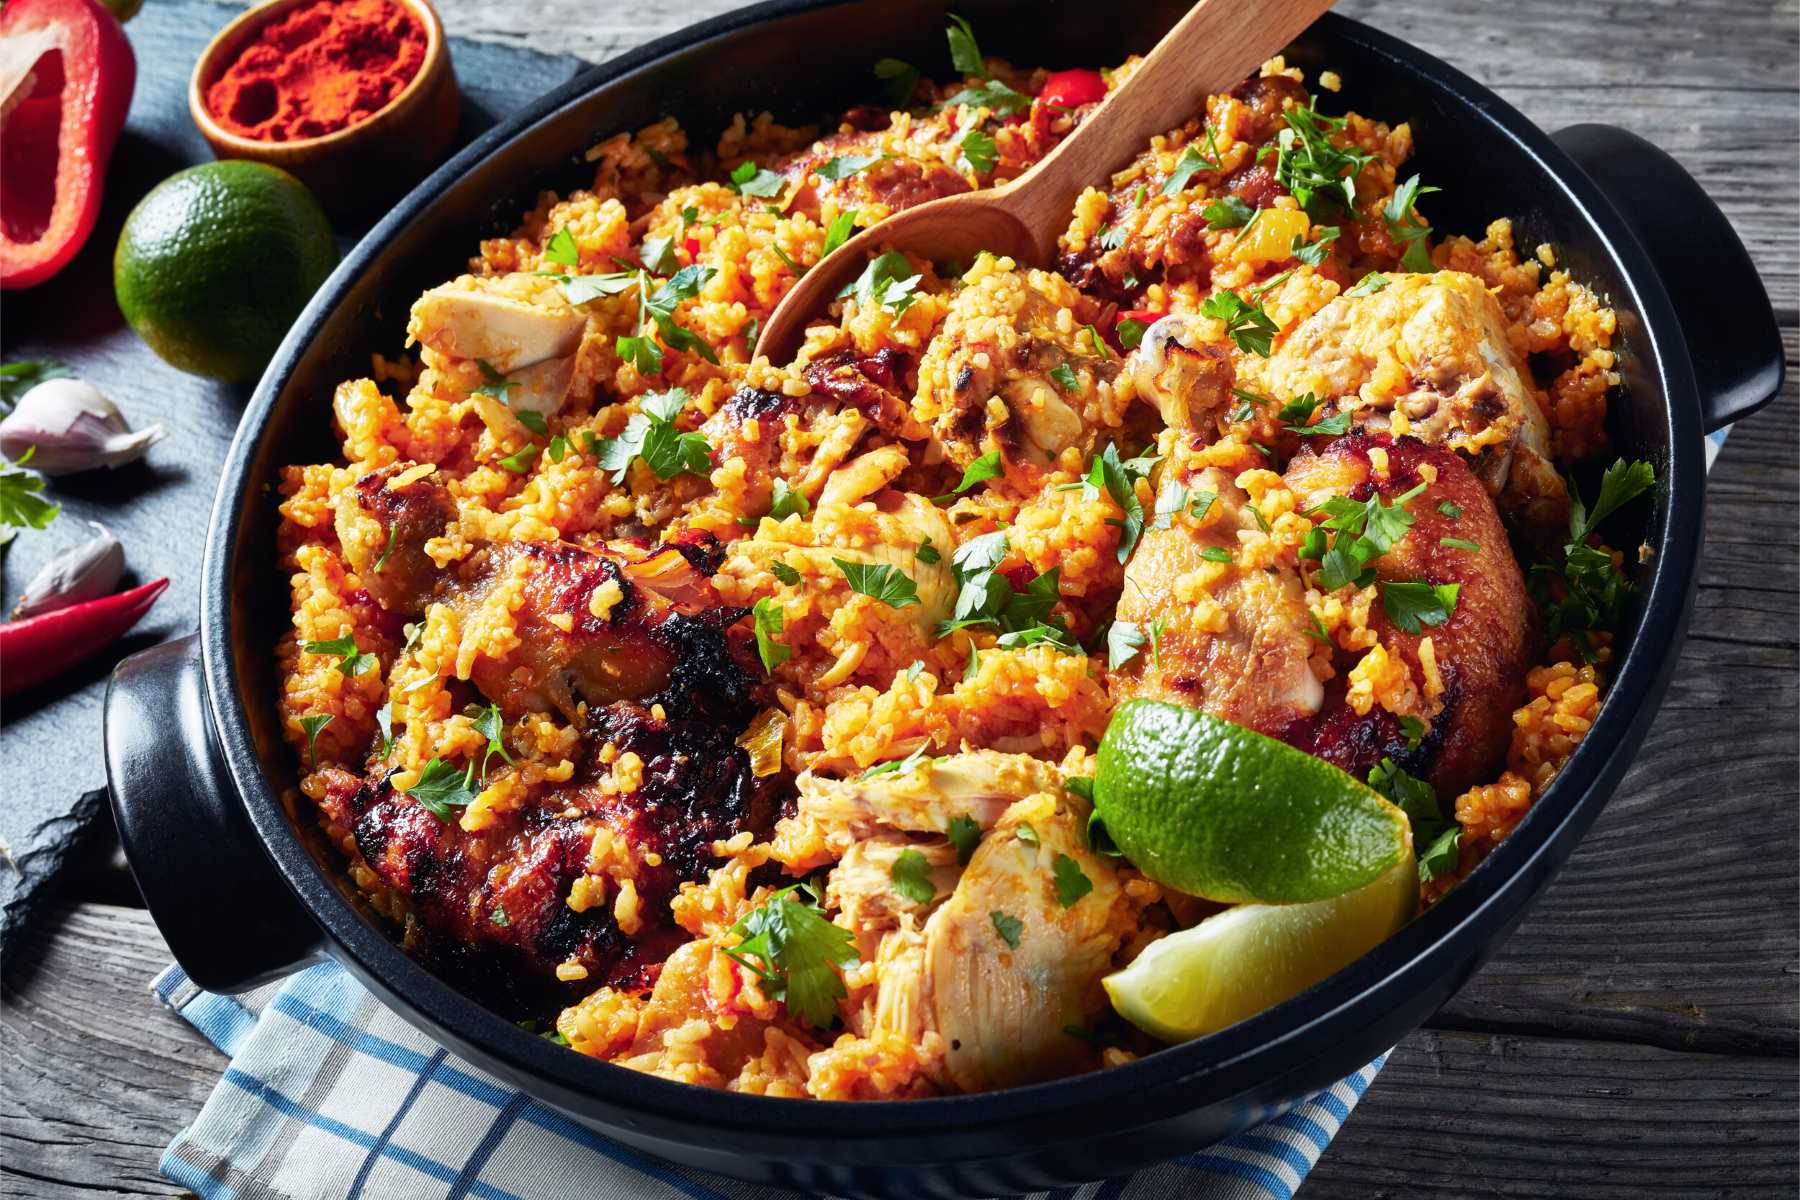 Delicious Paella For Foodie Friday